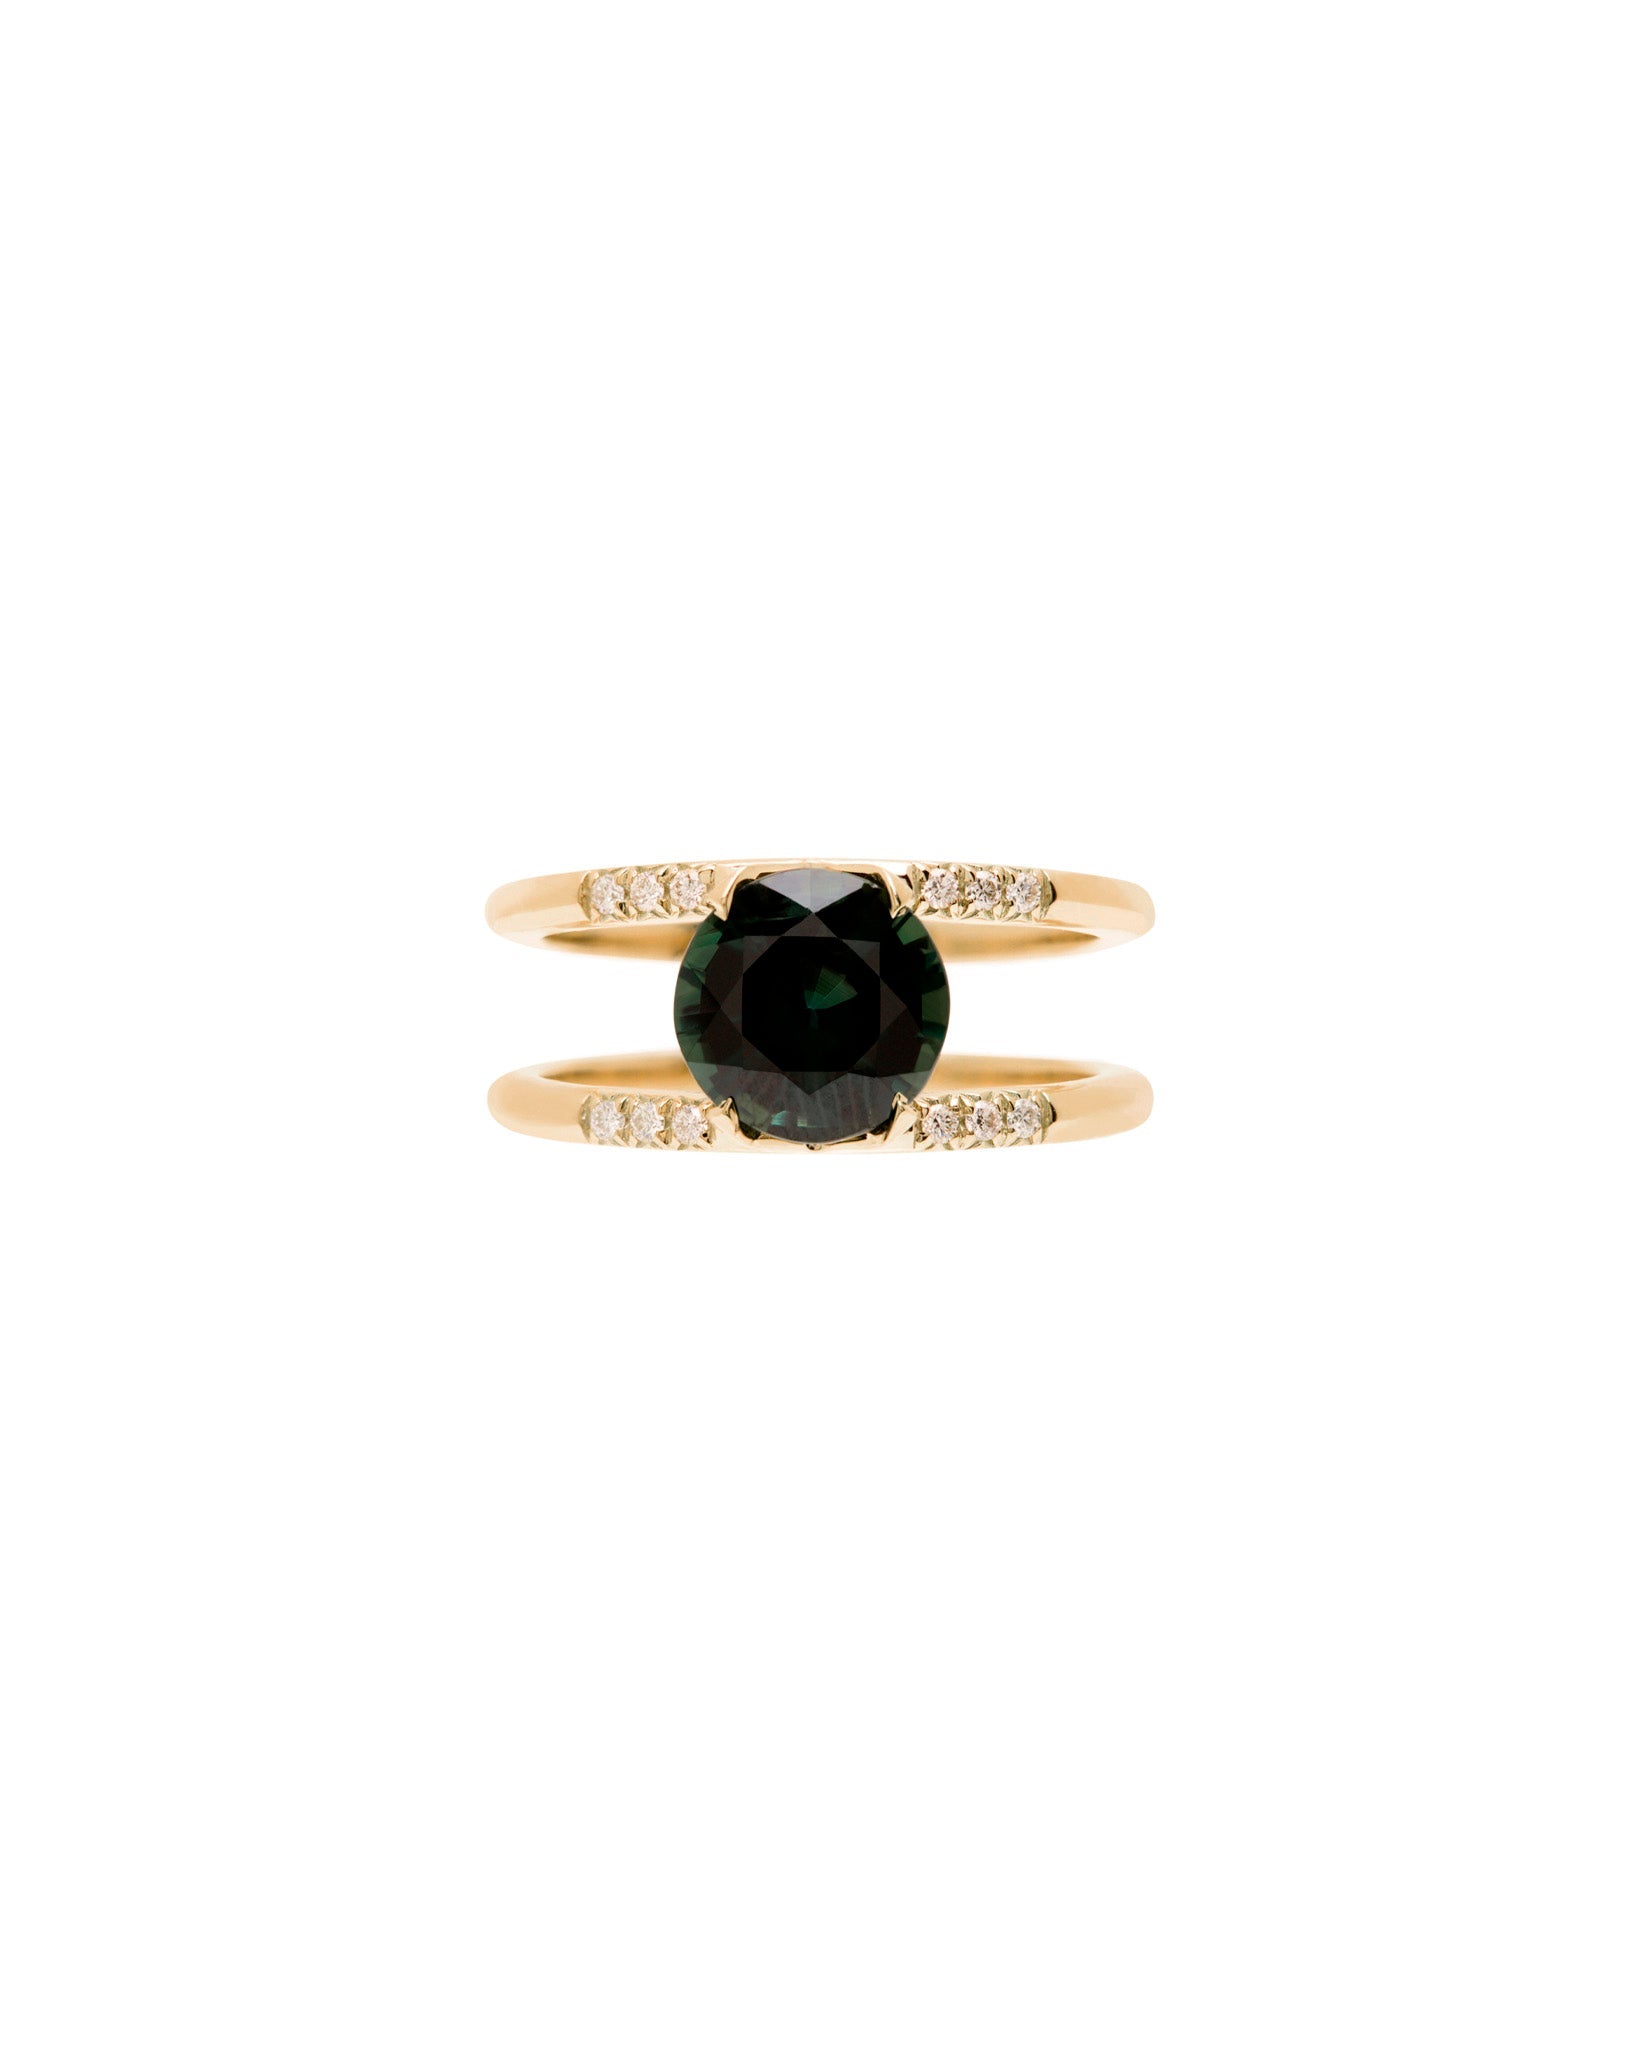 Bliss Lau Illuminate Ring in yellow gold. Engagement Ring.